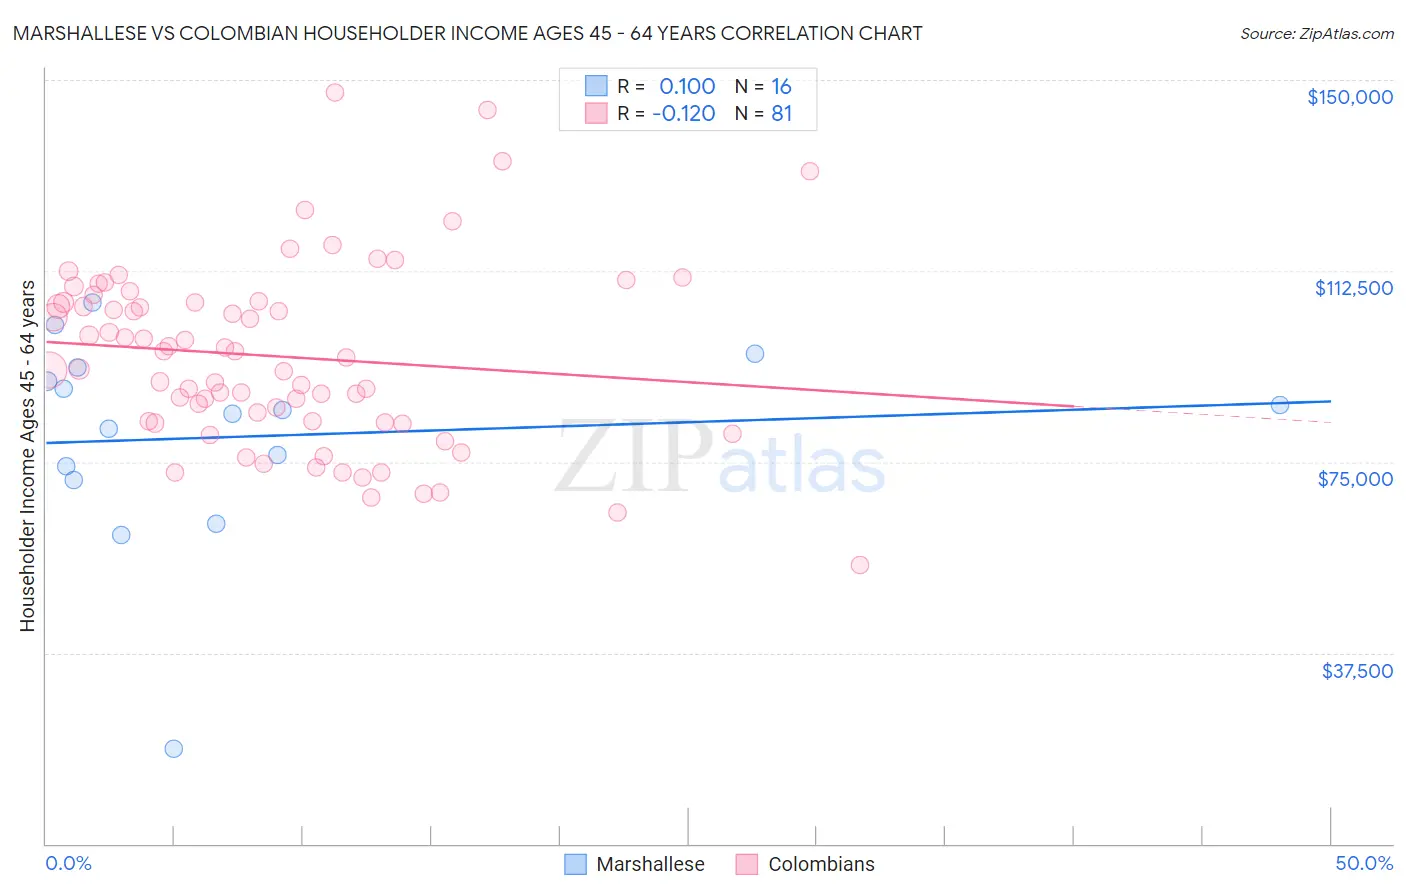 Marshallese vs Colombian Householder Income Ages 45 - 64 years